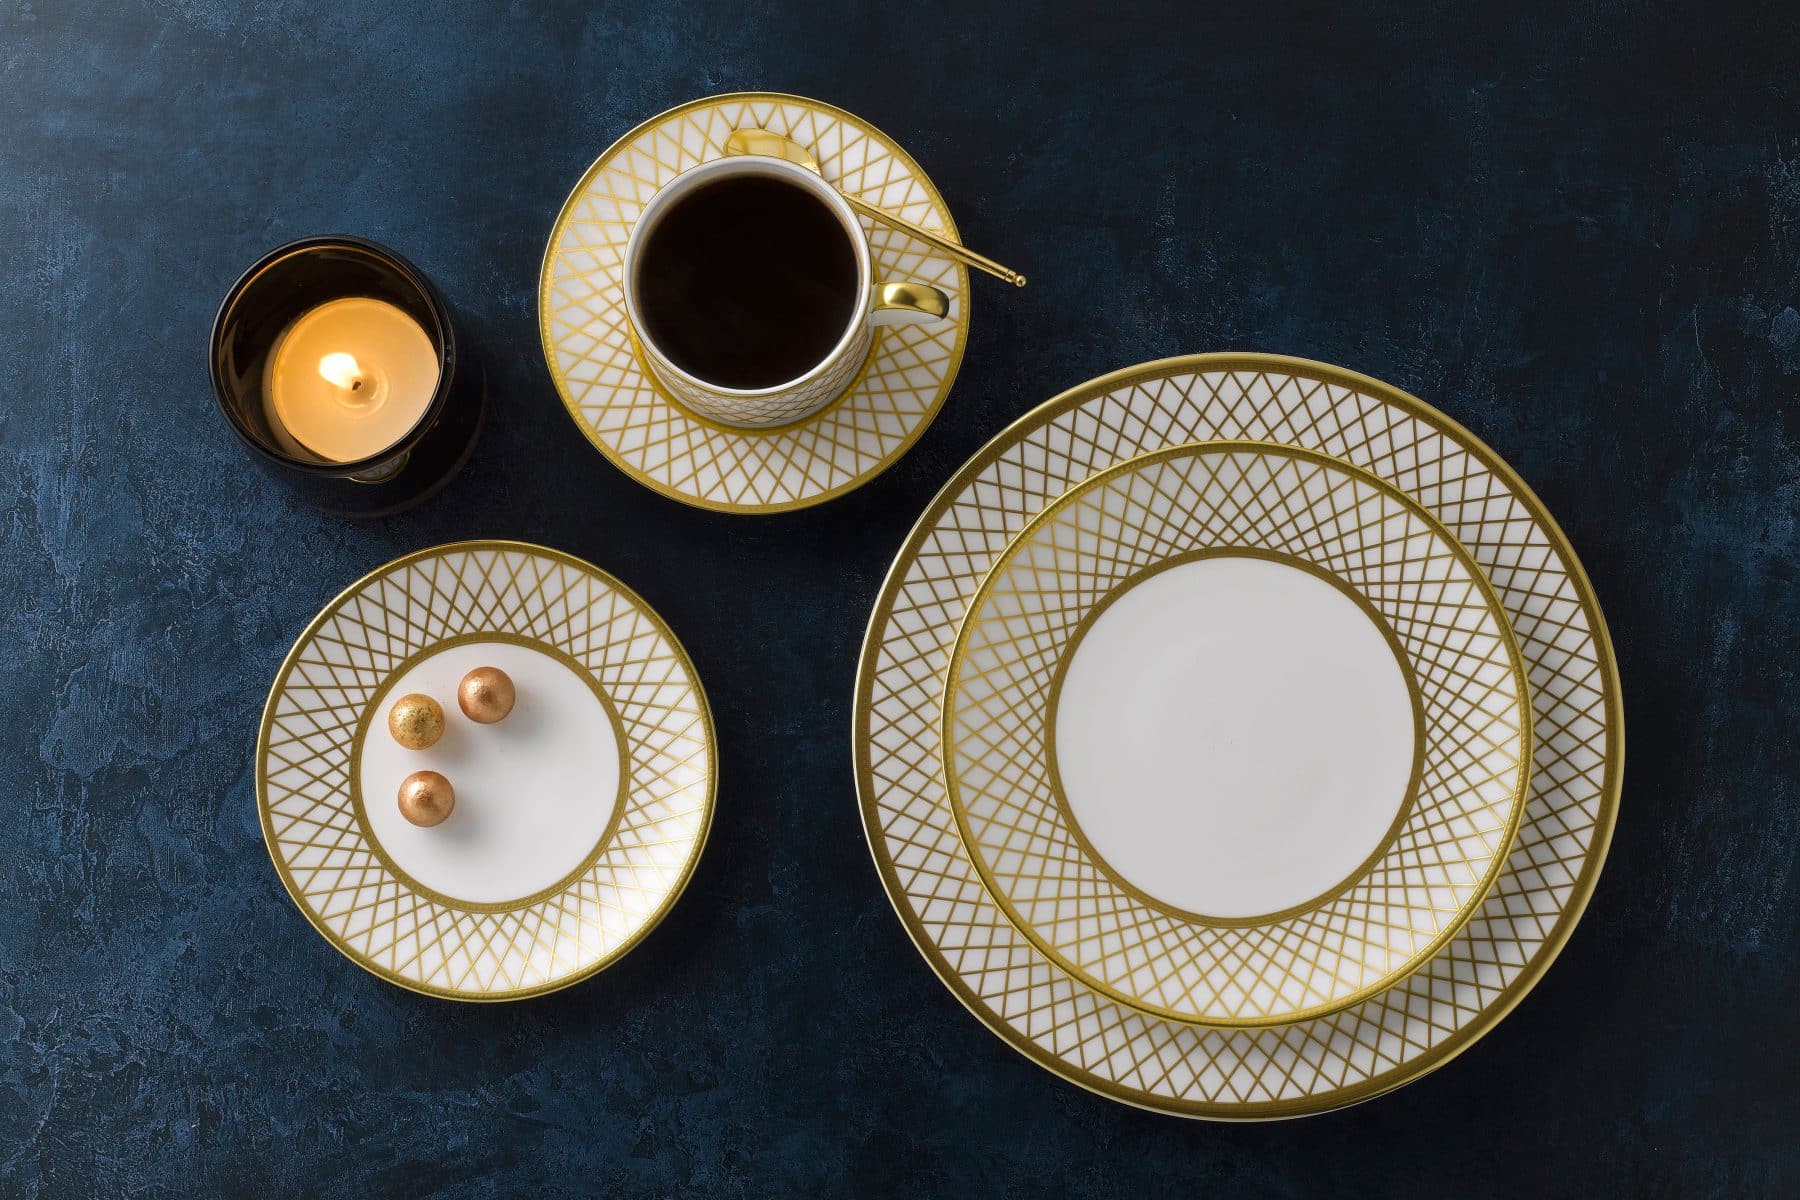 Majestic White and Gold Place Setting